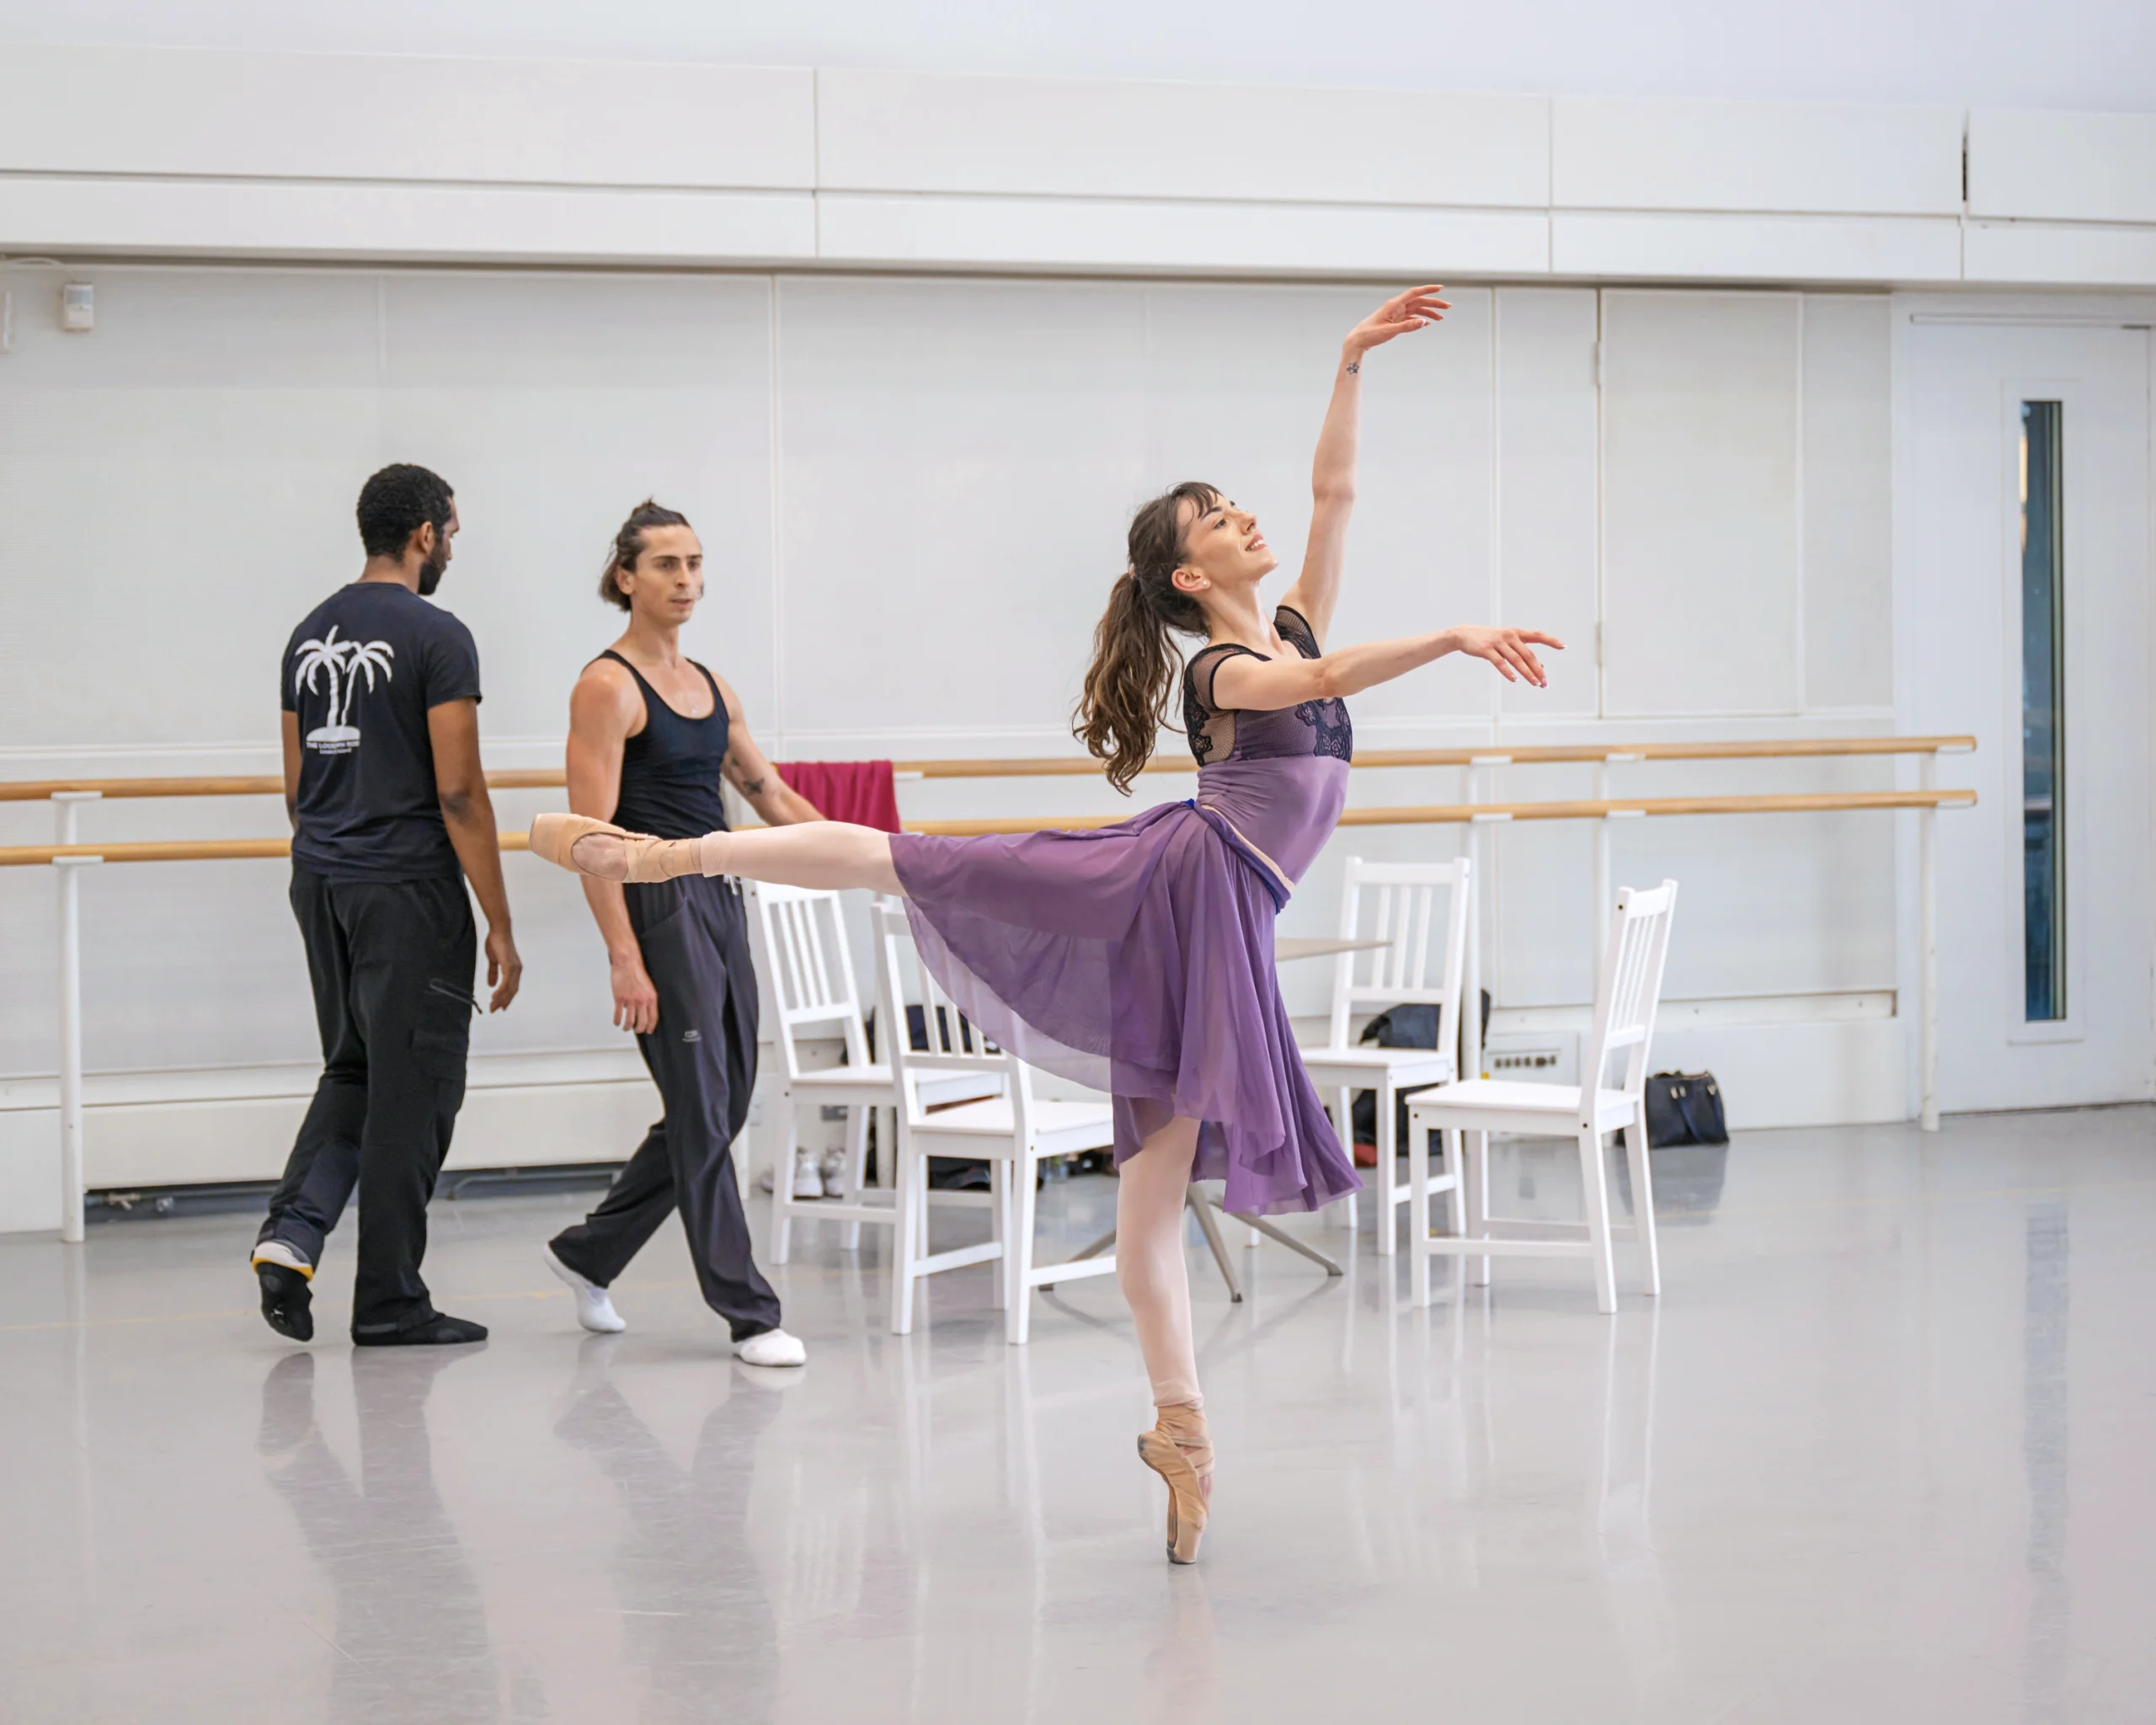 In a large dance studio, a female dancer does an arabesque on pointe in front of two male dancers, who walk behind her next to four white chairs.